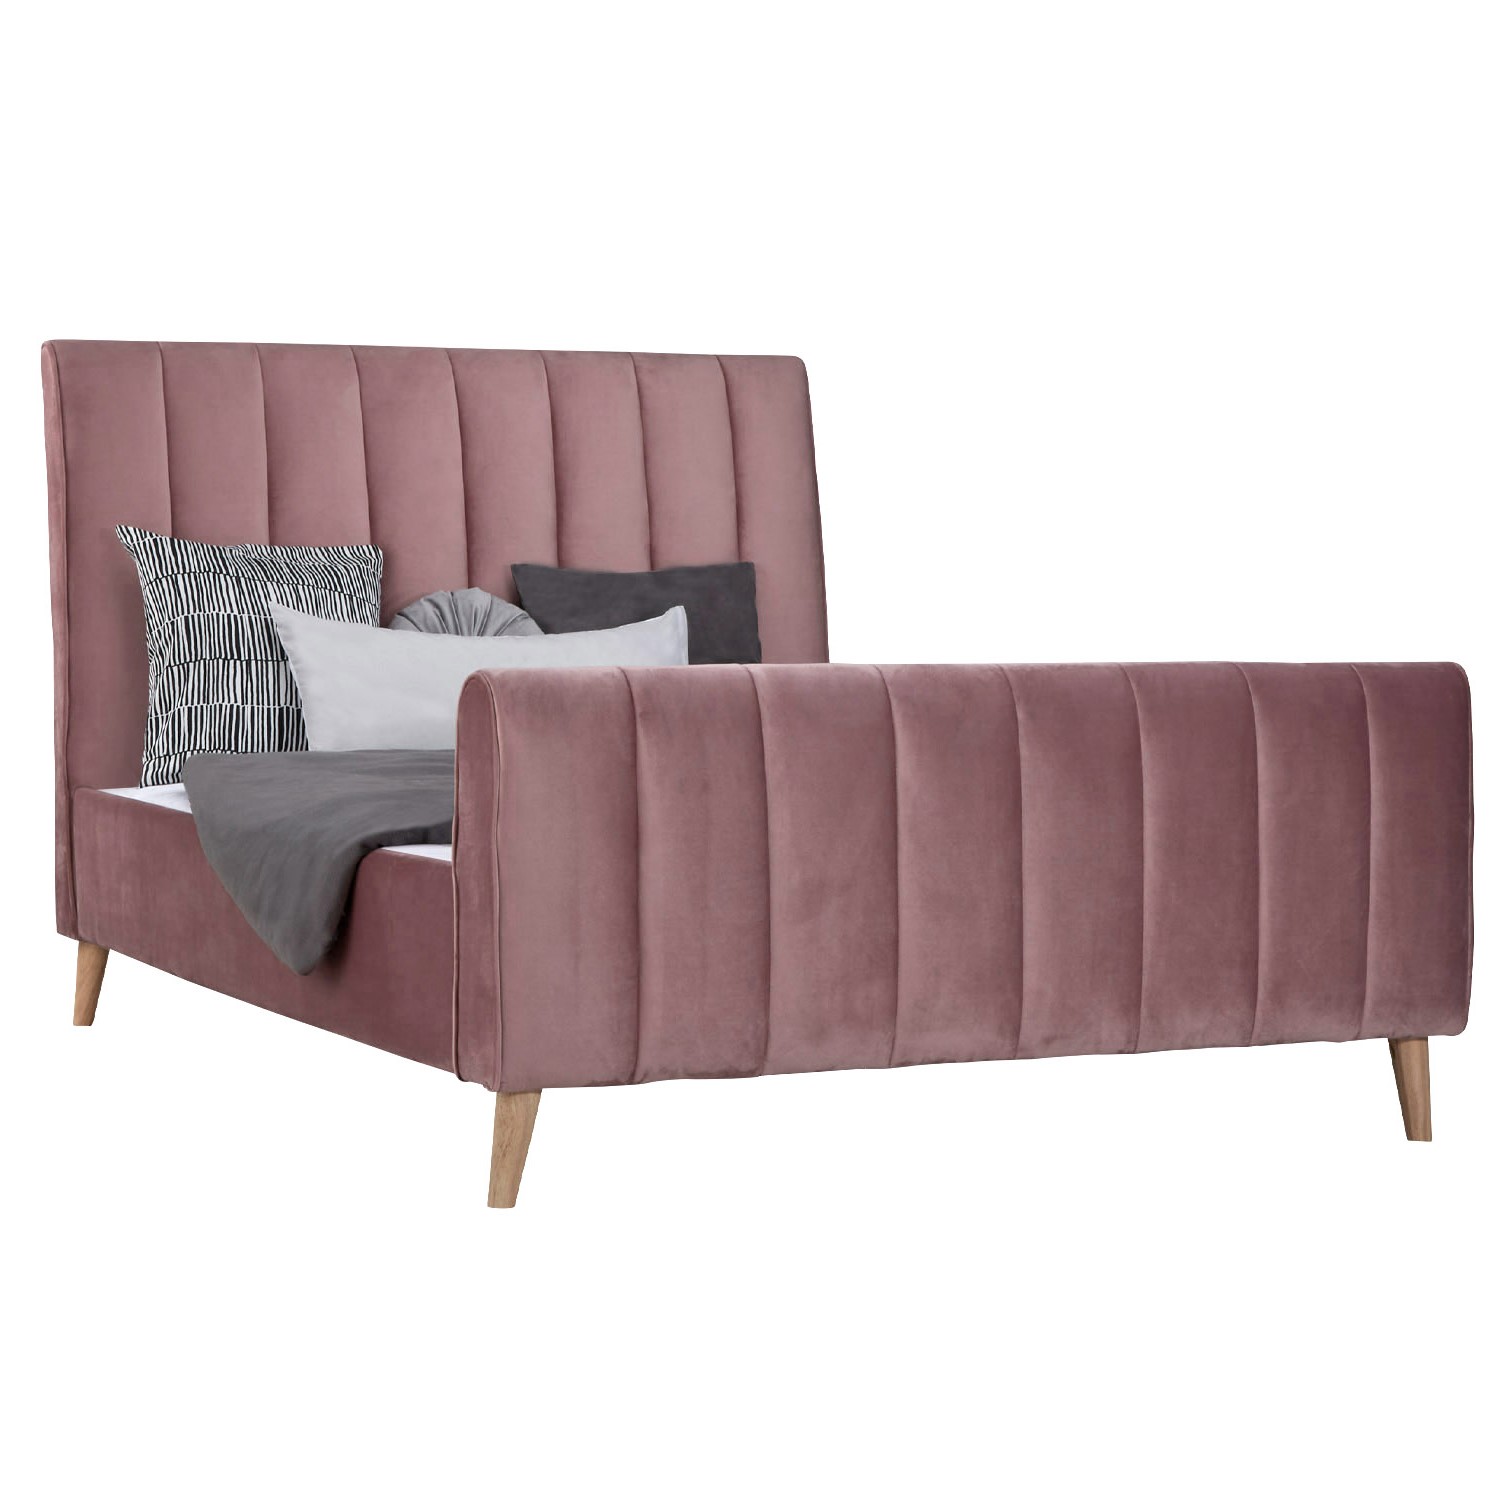 Upholstered Bed Velvet Pink Grey 140 x 200  cm with Slatted Frame Double Bed Fabric Bedstead 